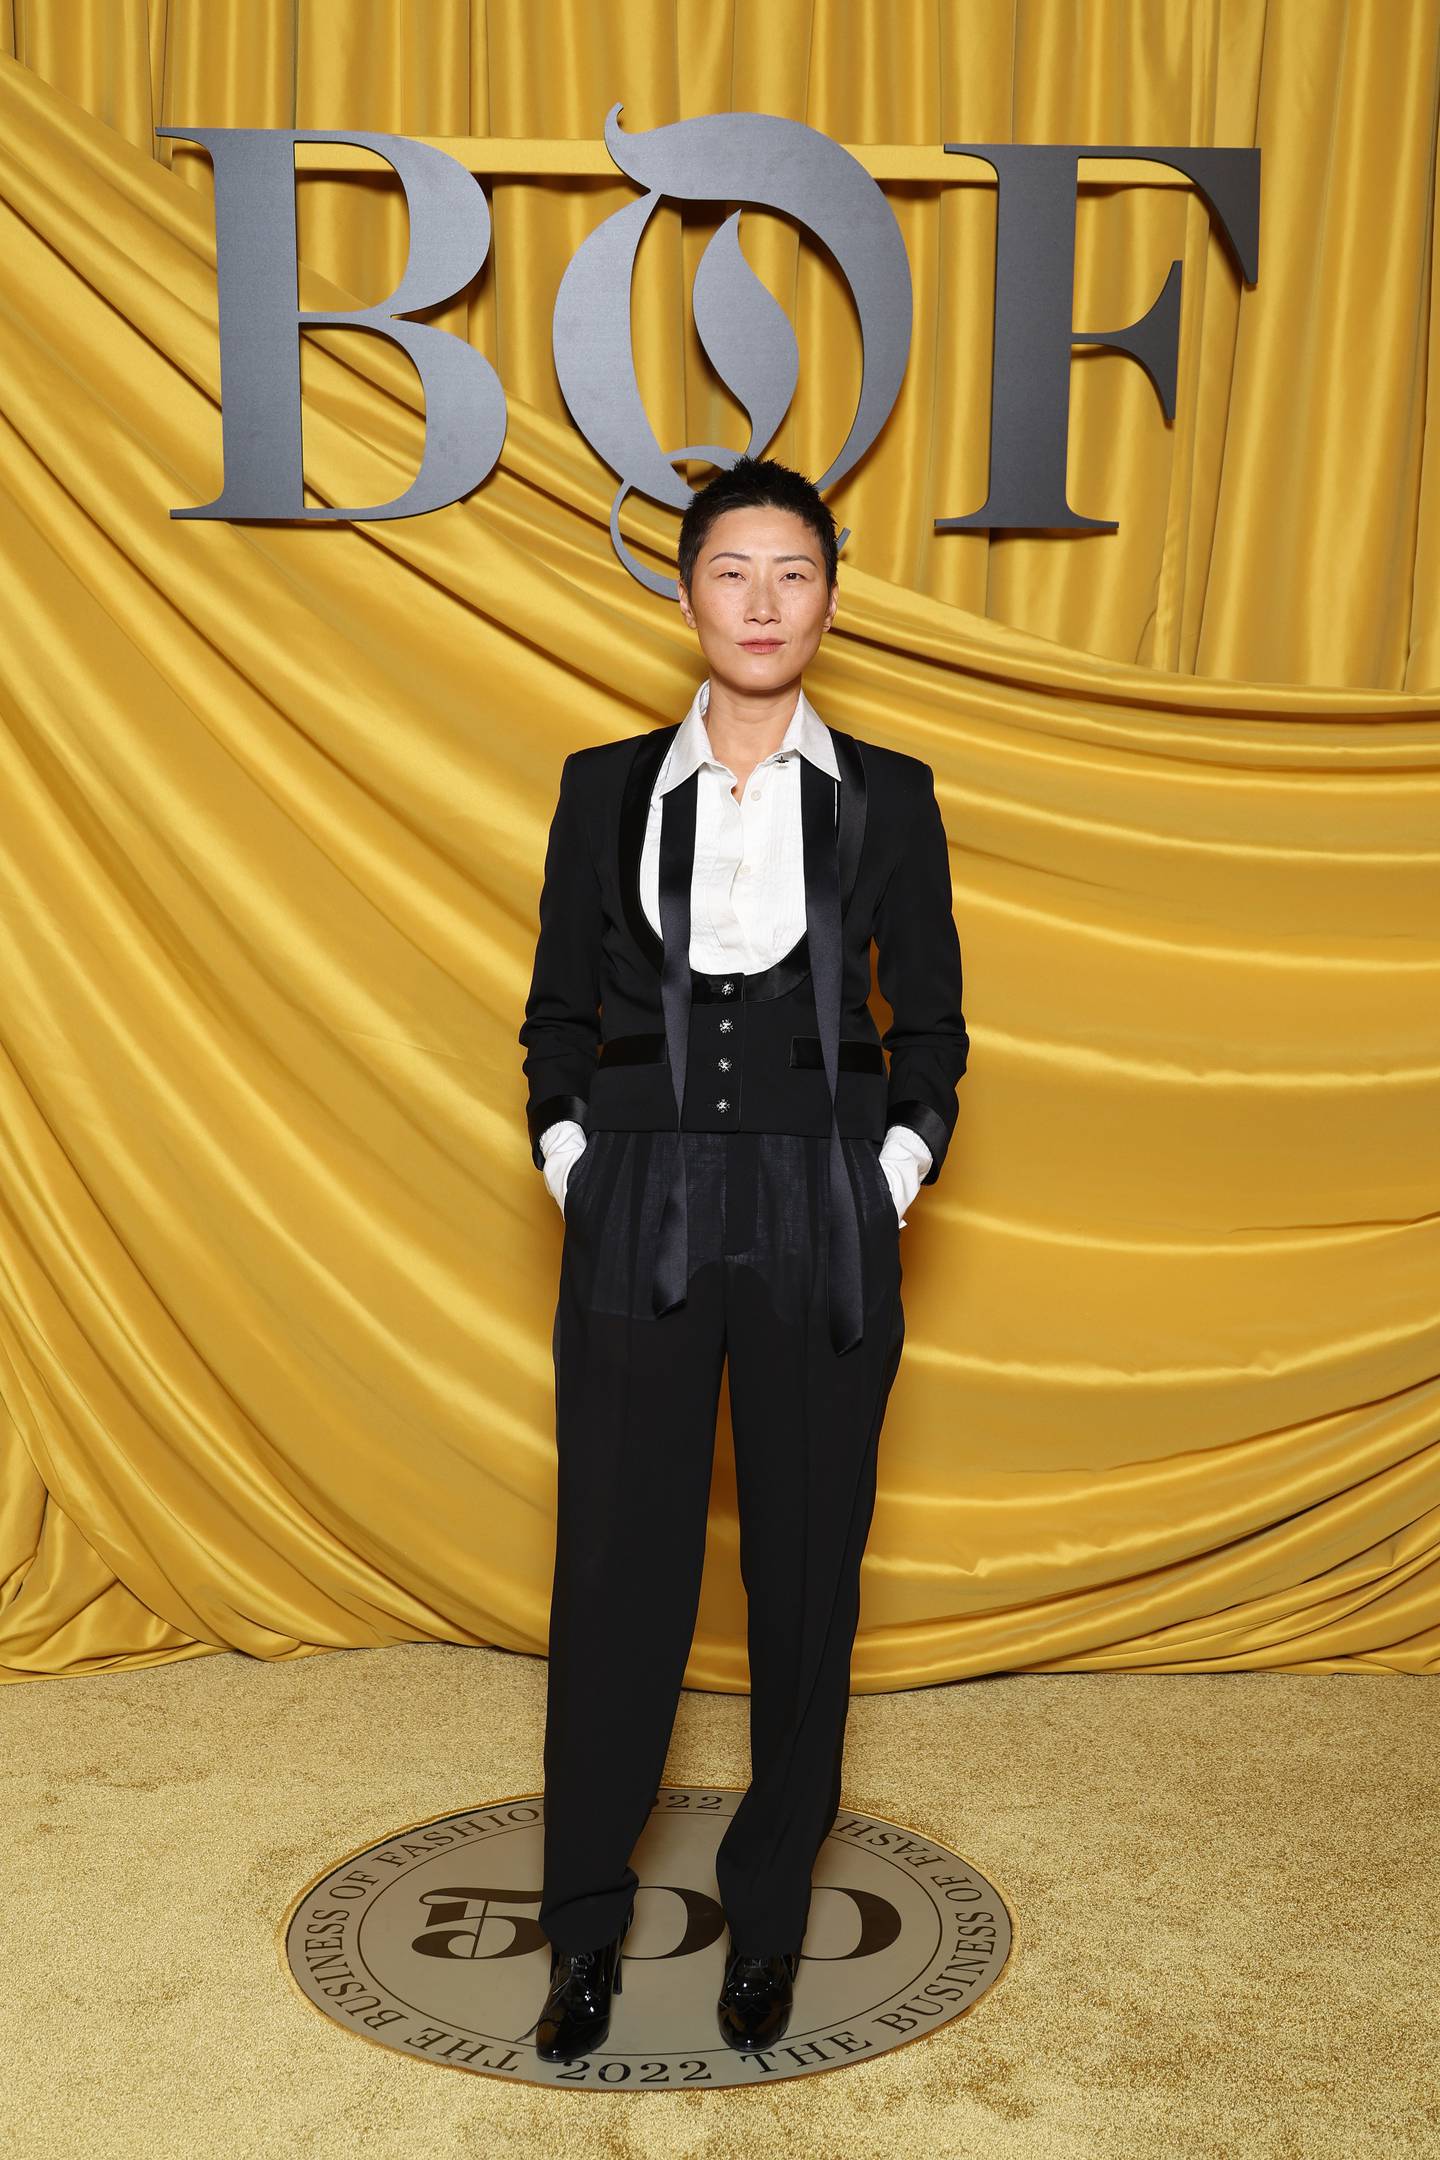 Leslie Sun, editorial director, from United States attends the #BoF500 gala during Paris Fashion Week.